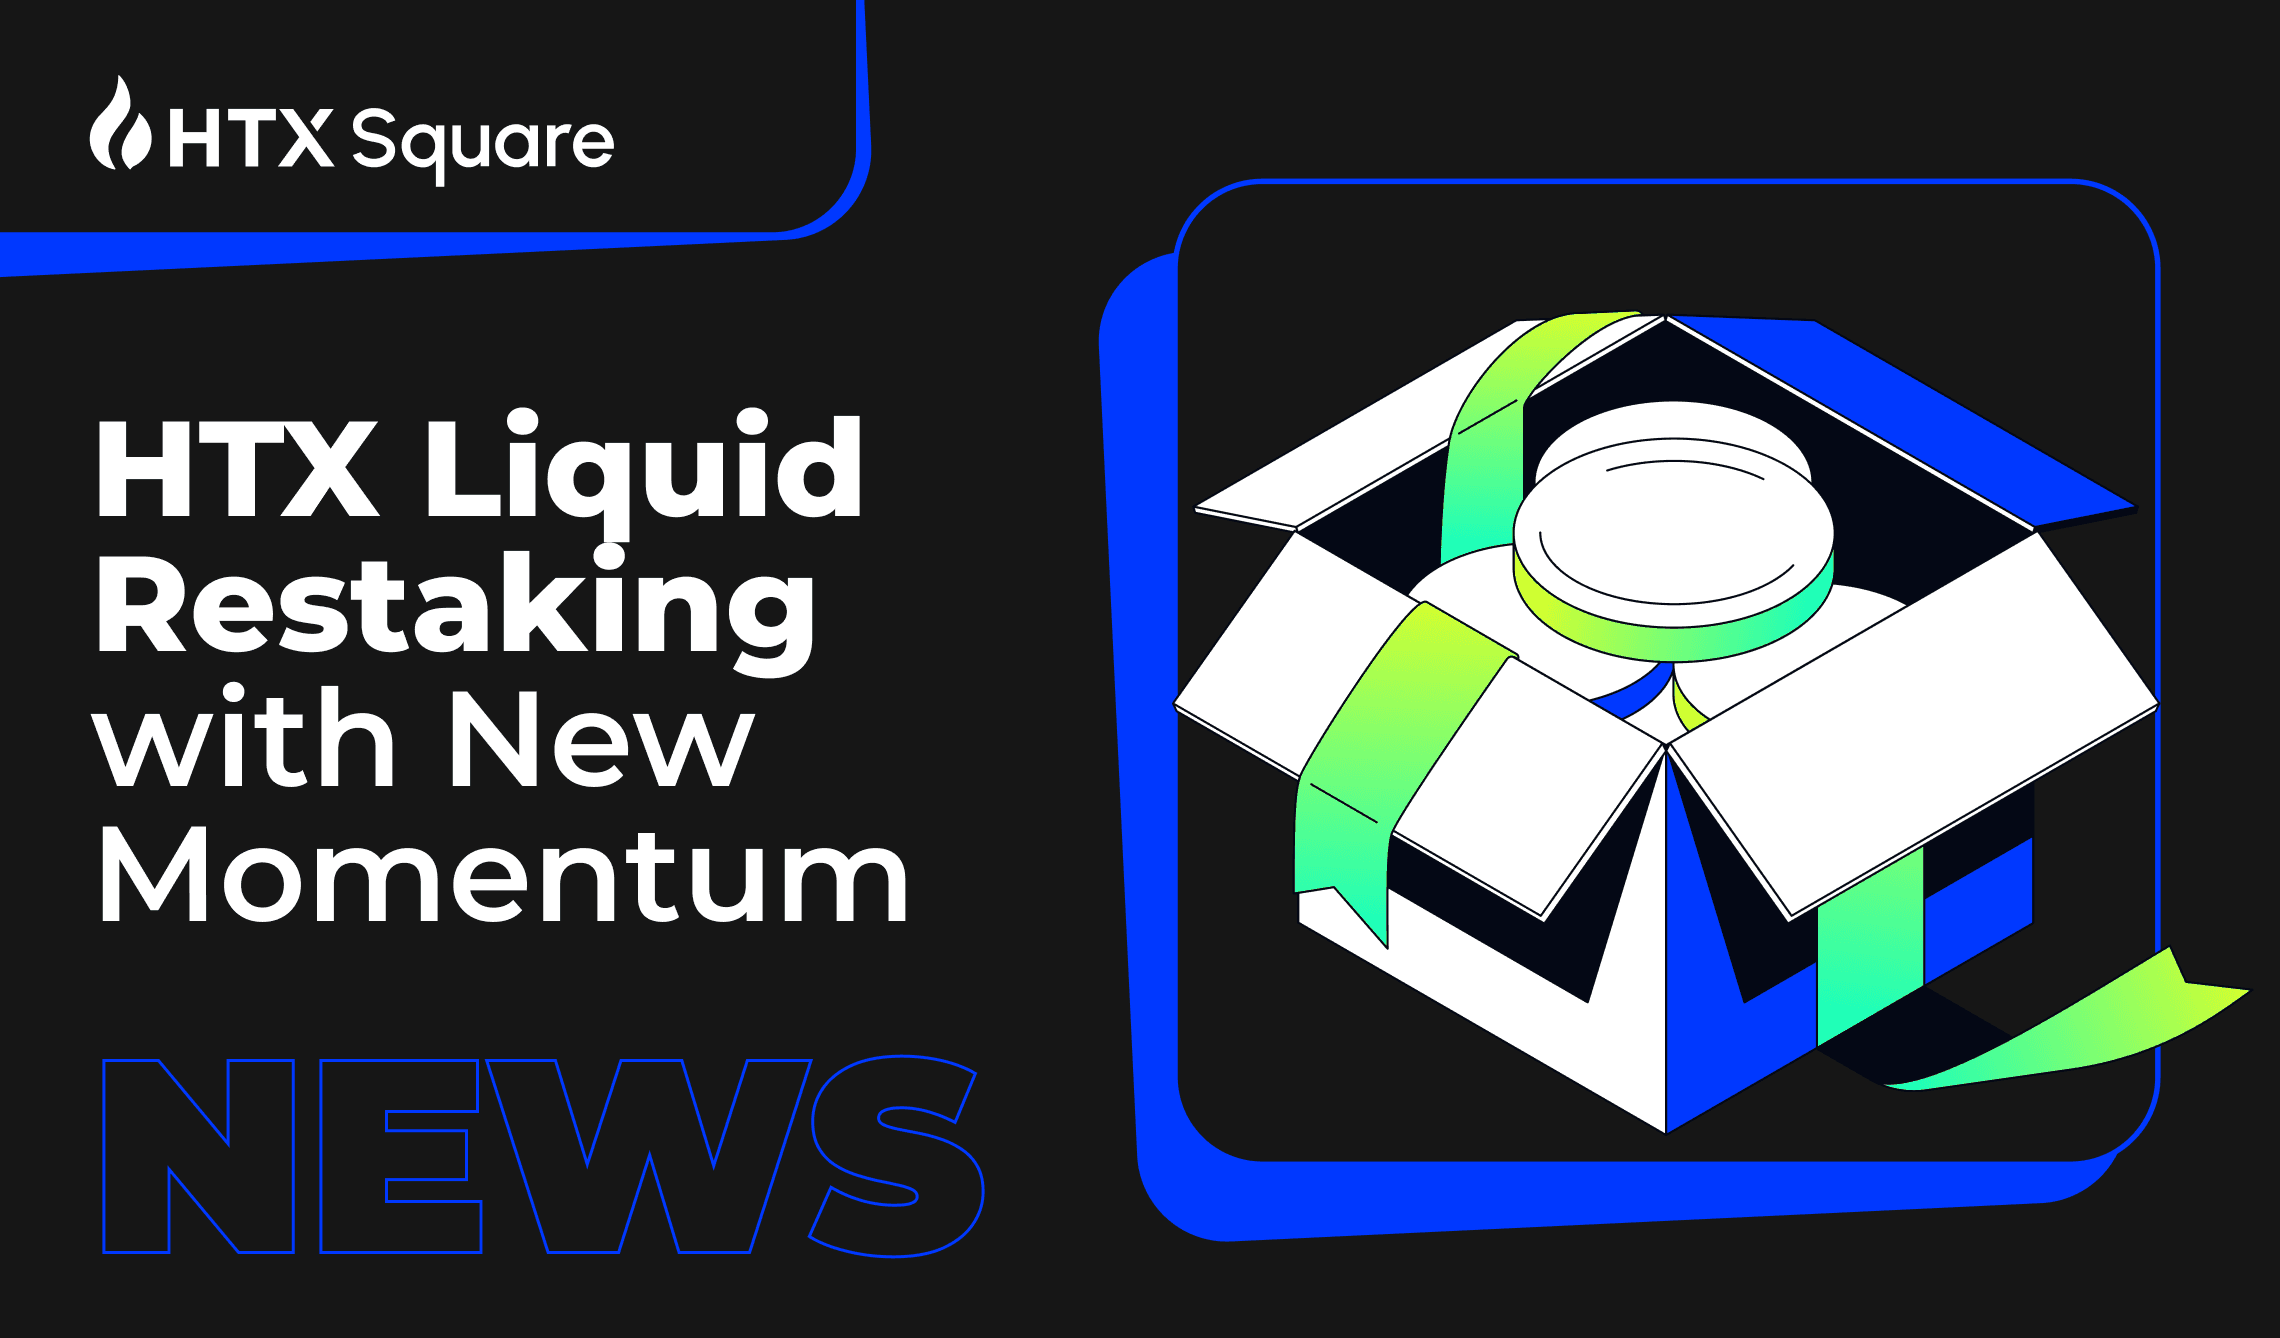 Bitcoin Halving Happens This Week: HTX Liquid Restaking with New Momentum Fuels Your Crypto Growth